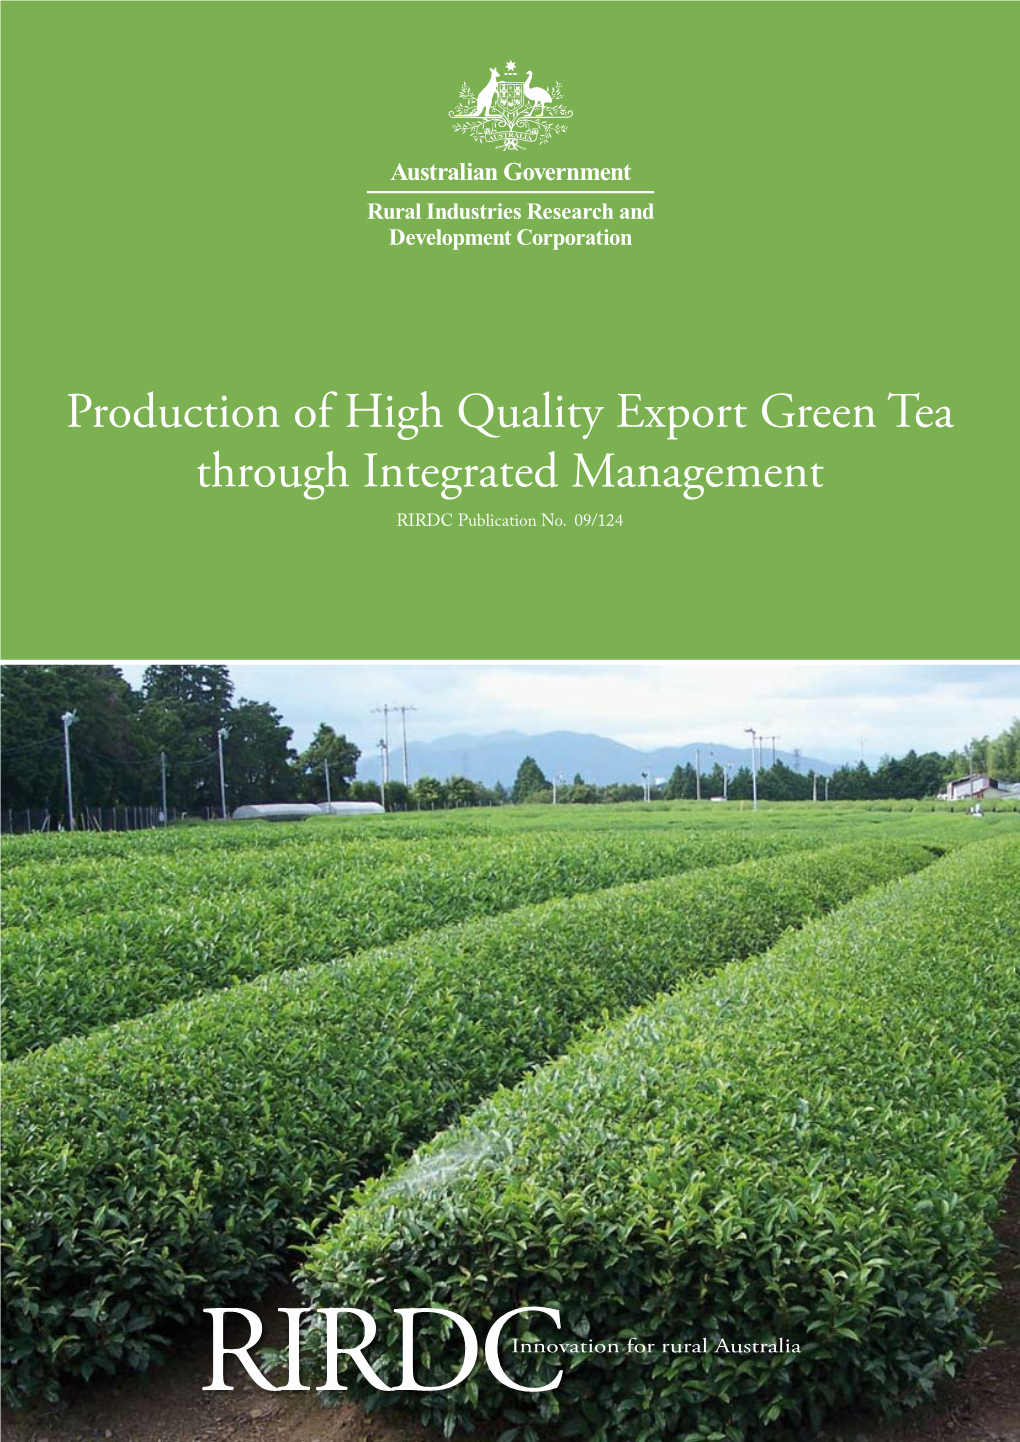 Production of High Quality Export Green Tea Through Integrated Management RIRDC Publication No